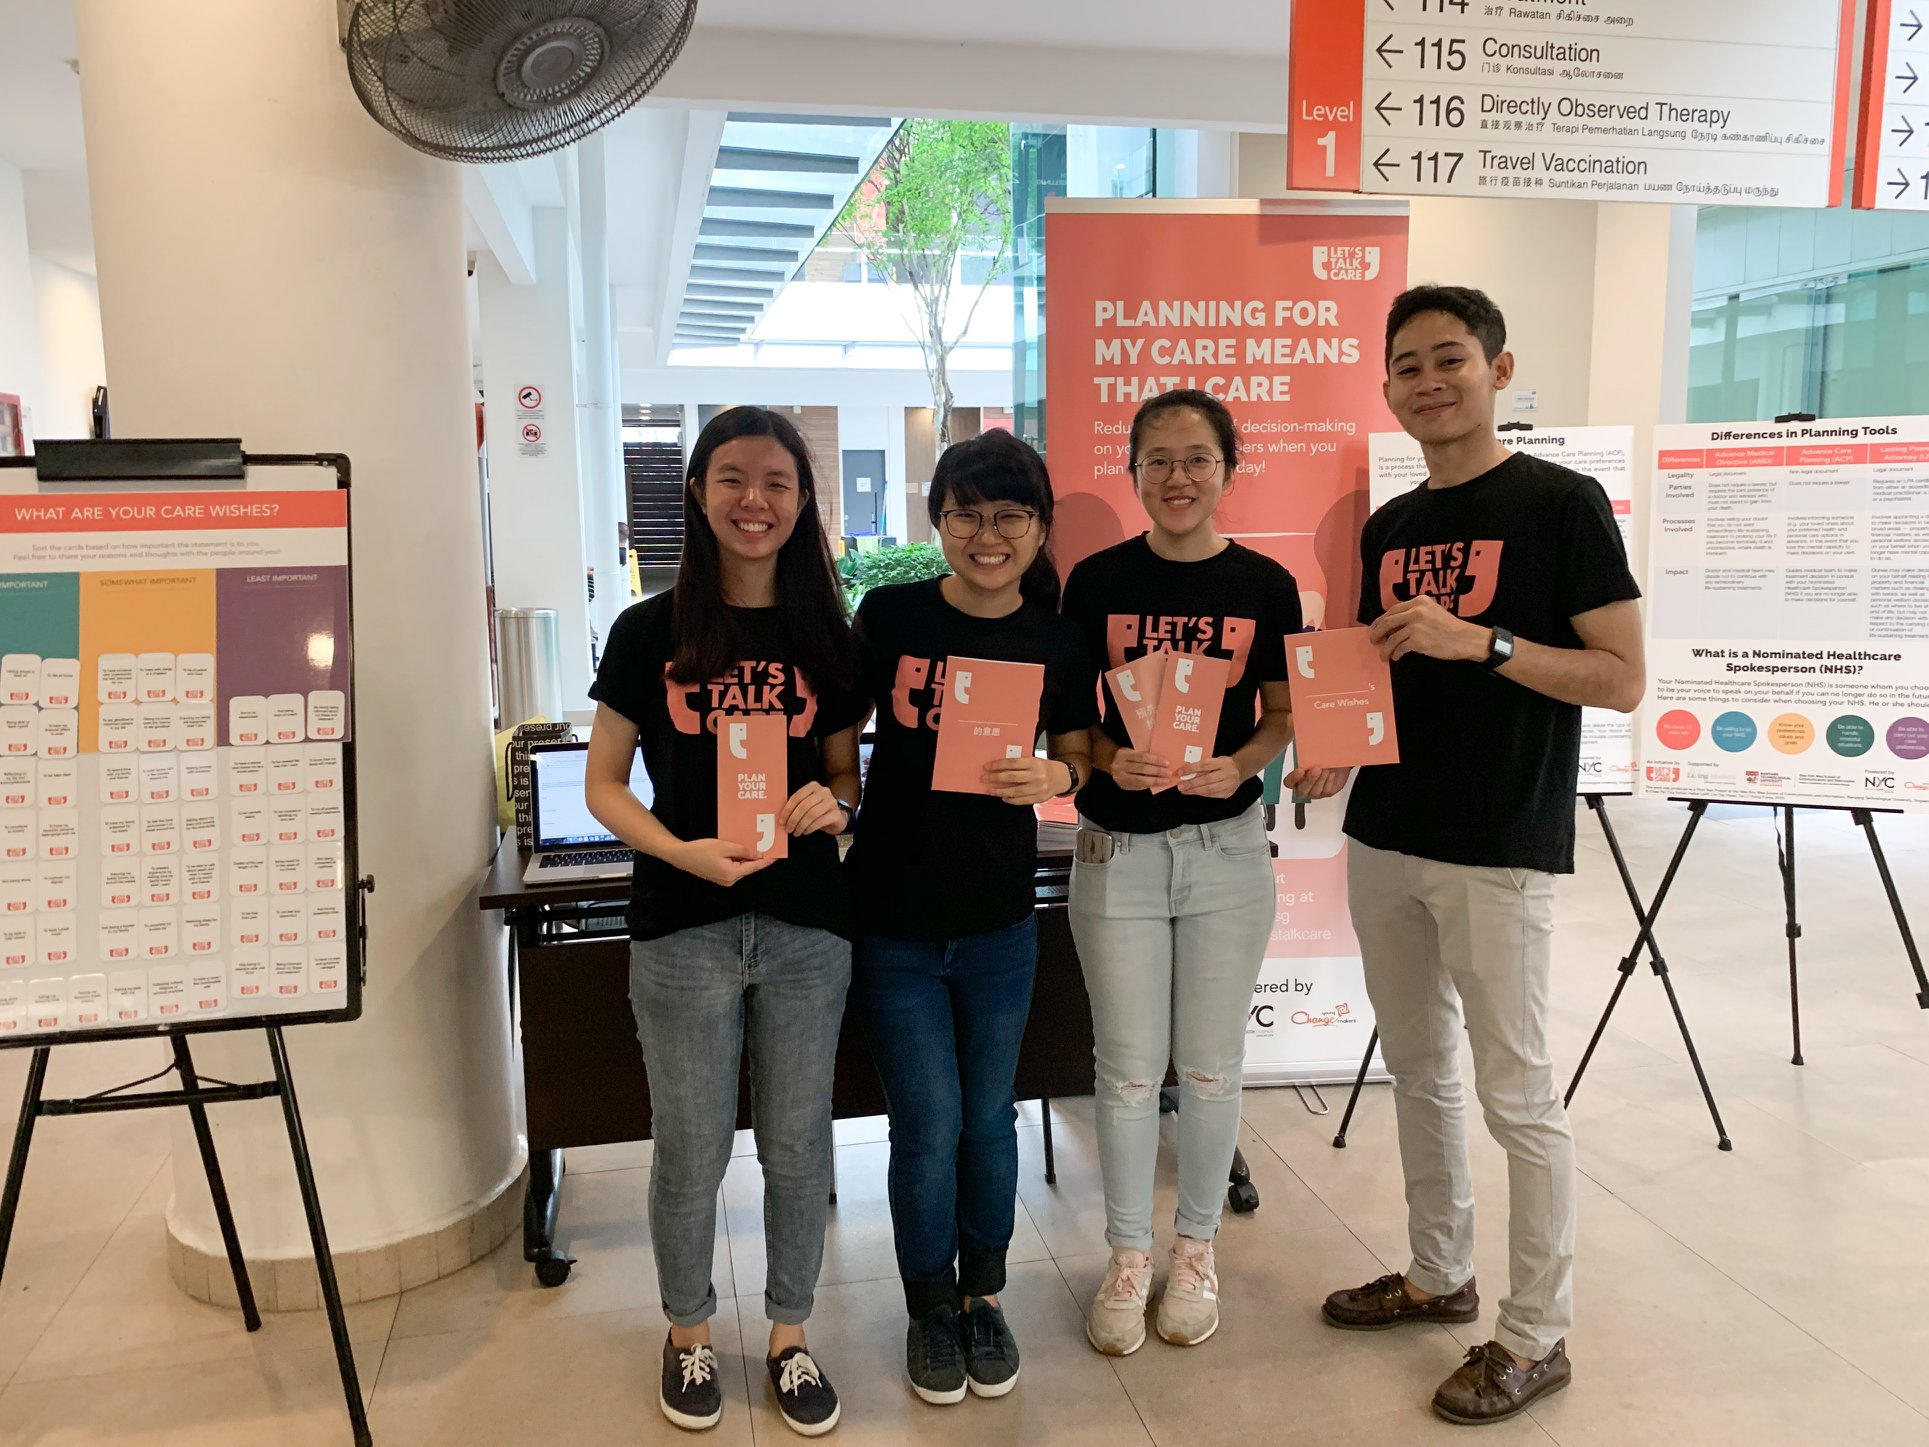 (L-R) Esther Chew, Freda Tan, Lim Say Hwee and Haikal Latiff are behind a drive to get older Singaporeans to plan their elder care preferences (Photo: Let’s Talk Care / Facebook)